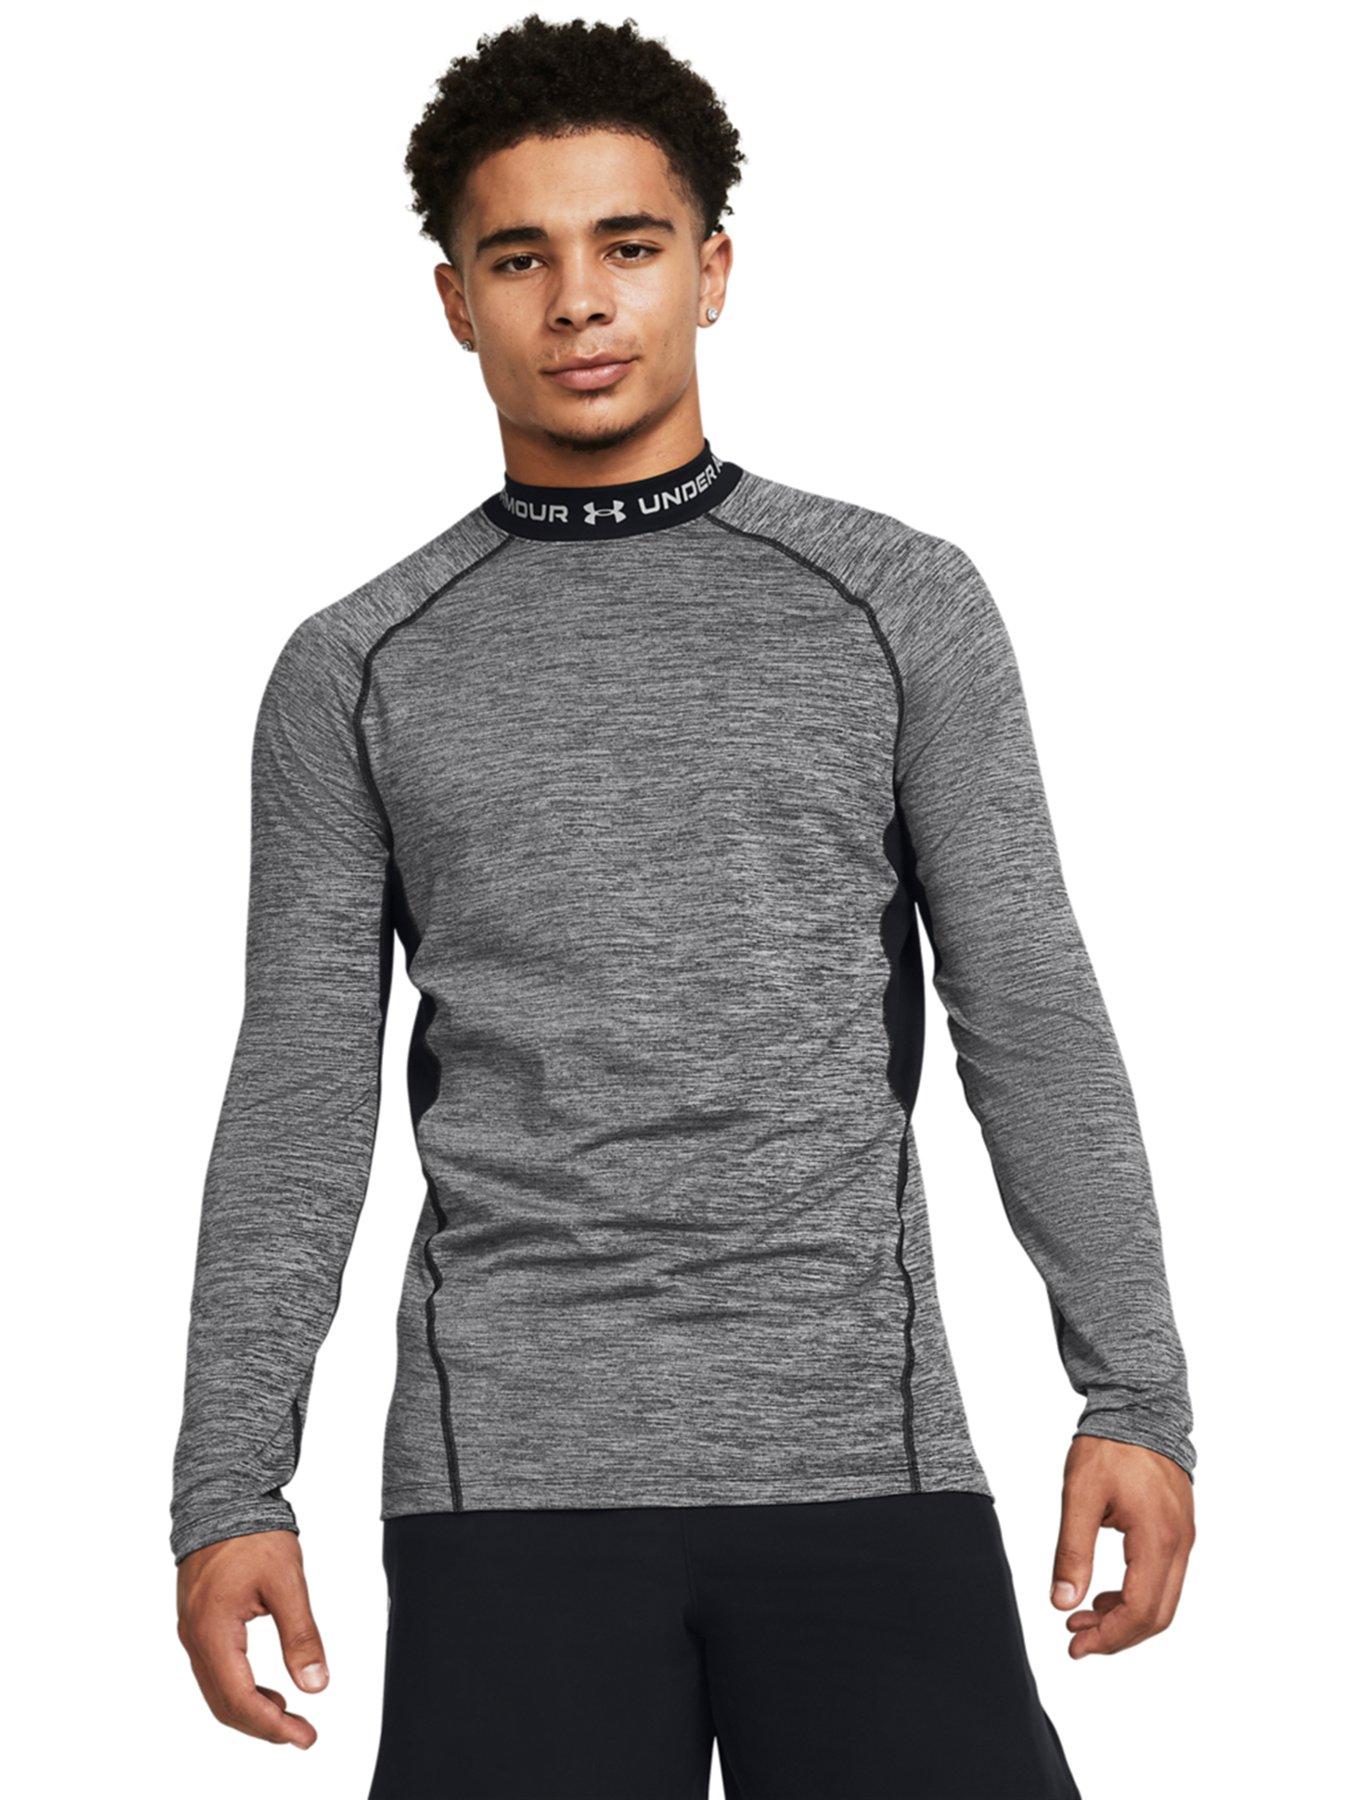 Under Armour Training coldgear mock neck long sleeve top in white